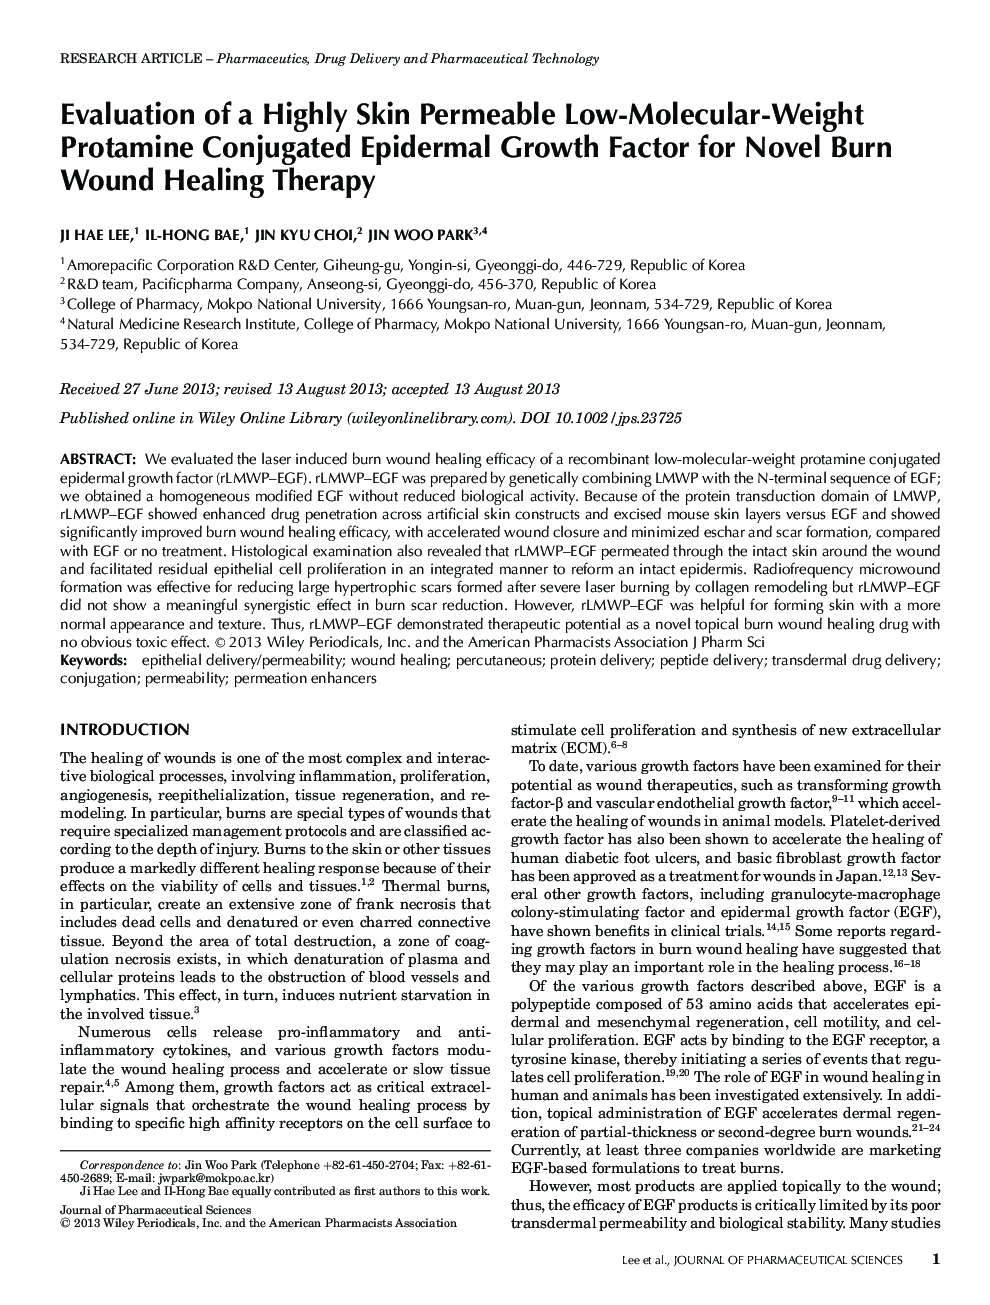 Evaluation of a Highly Skin Permeable Low-Molecular-Weight Protamine Conjugated Epidermal Growth Factor for Novel Burn Wound Healing Therapy